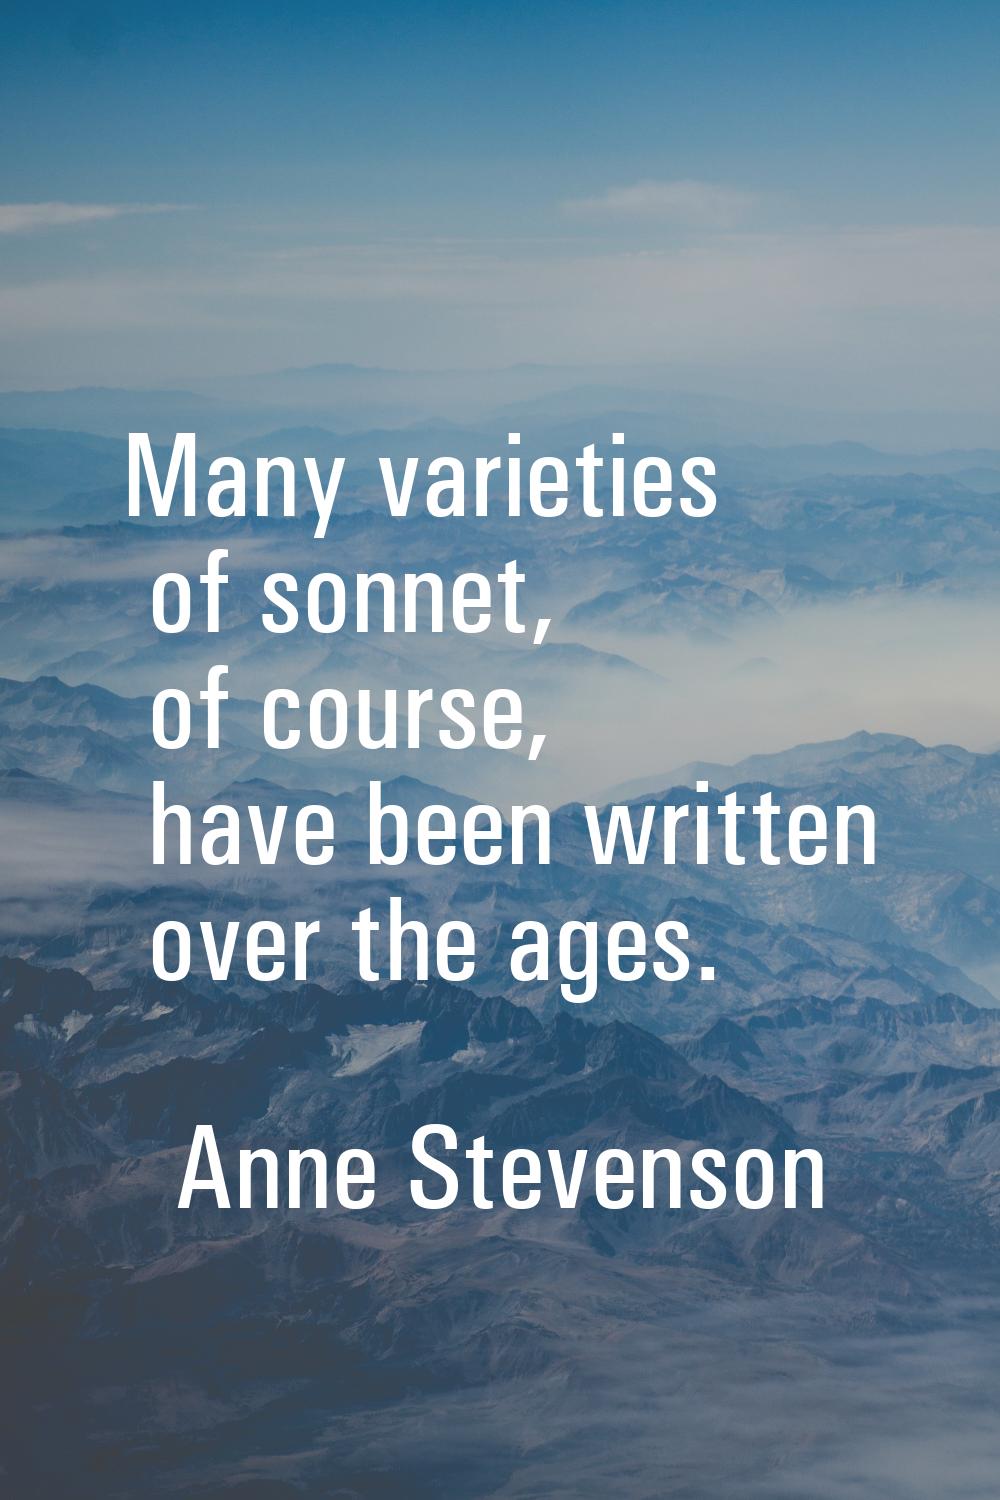 Many varieties of sonnet, of course, have been written over the ages.